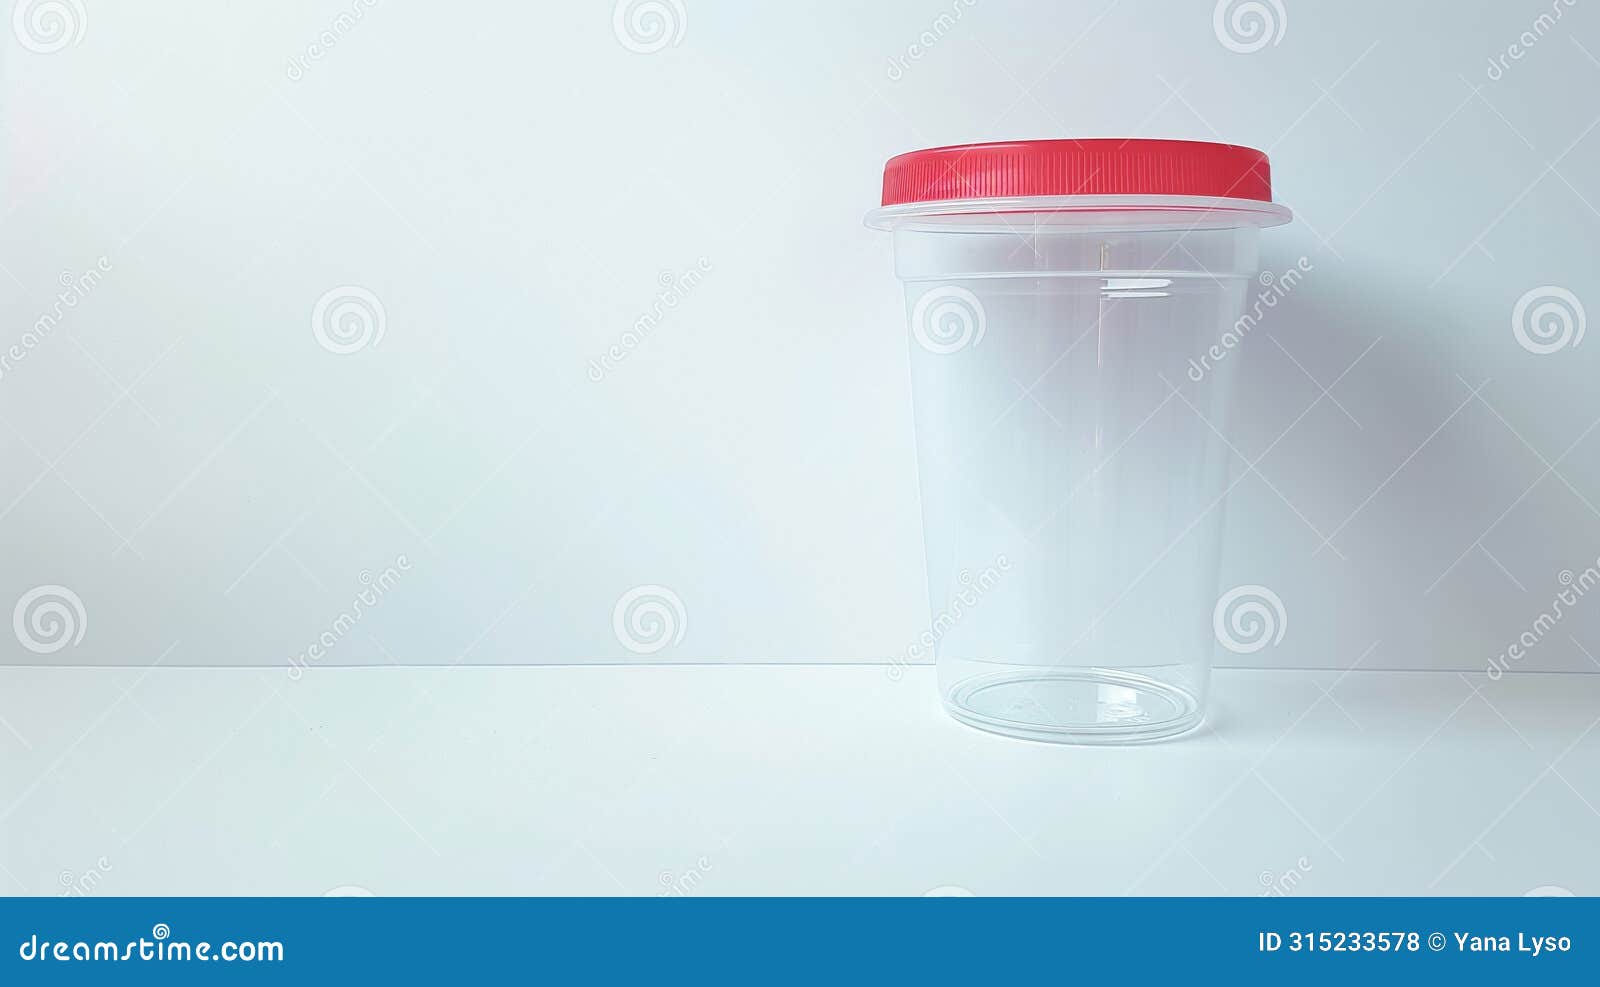 transparent urine analysis container with a red lid. clear specimen cup on a white backdrop. concept of urinalysis